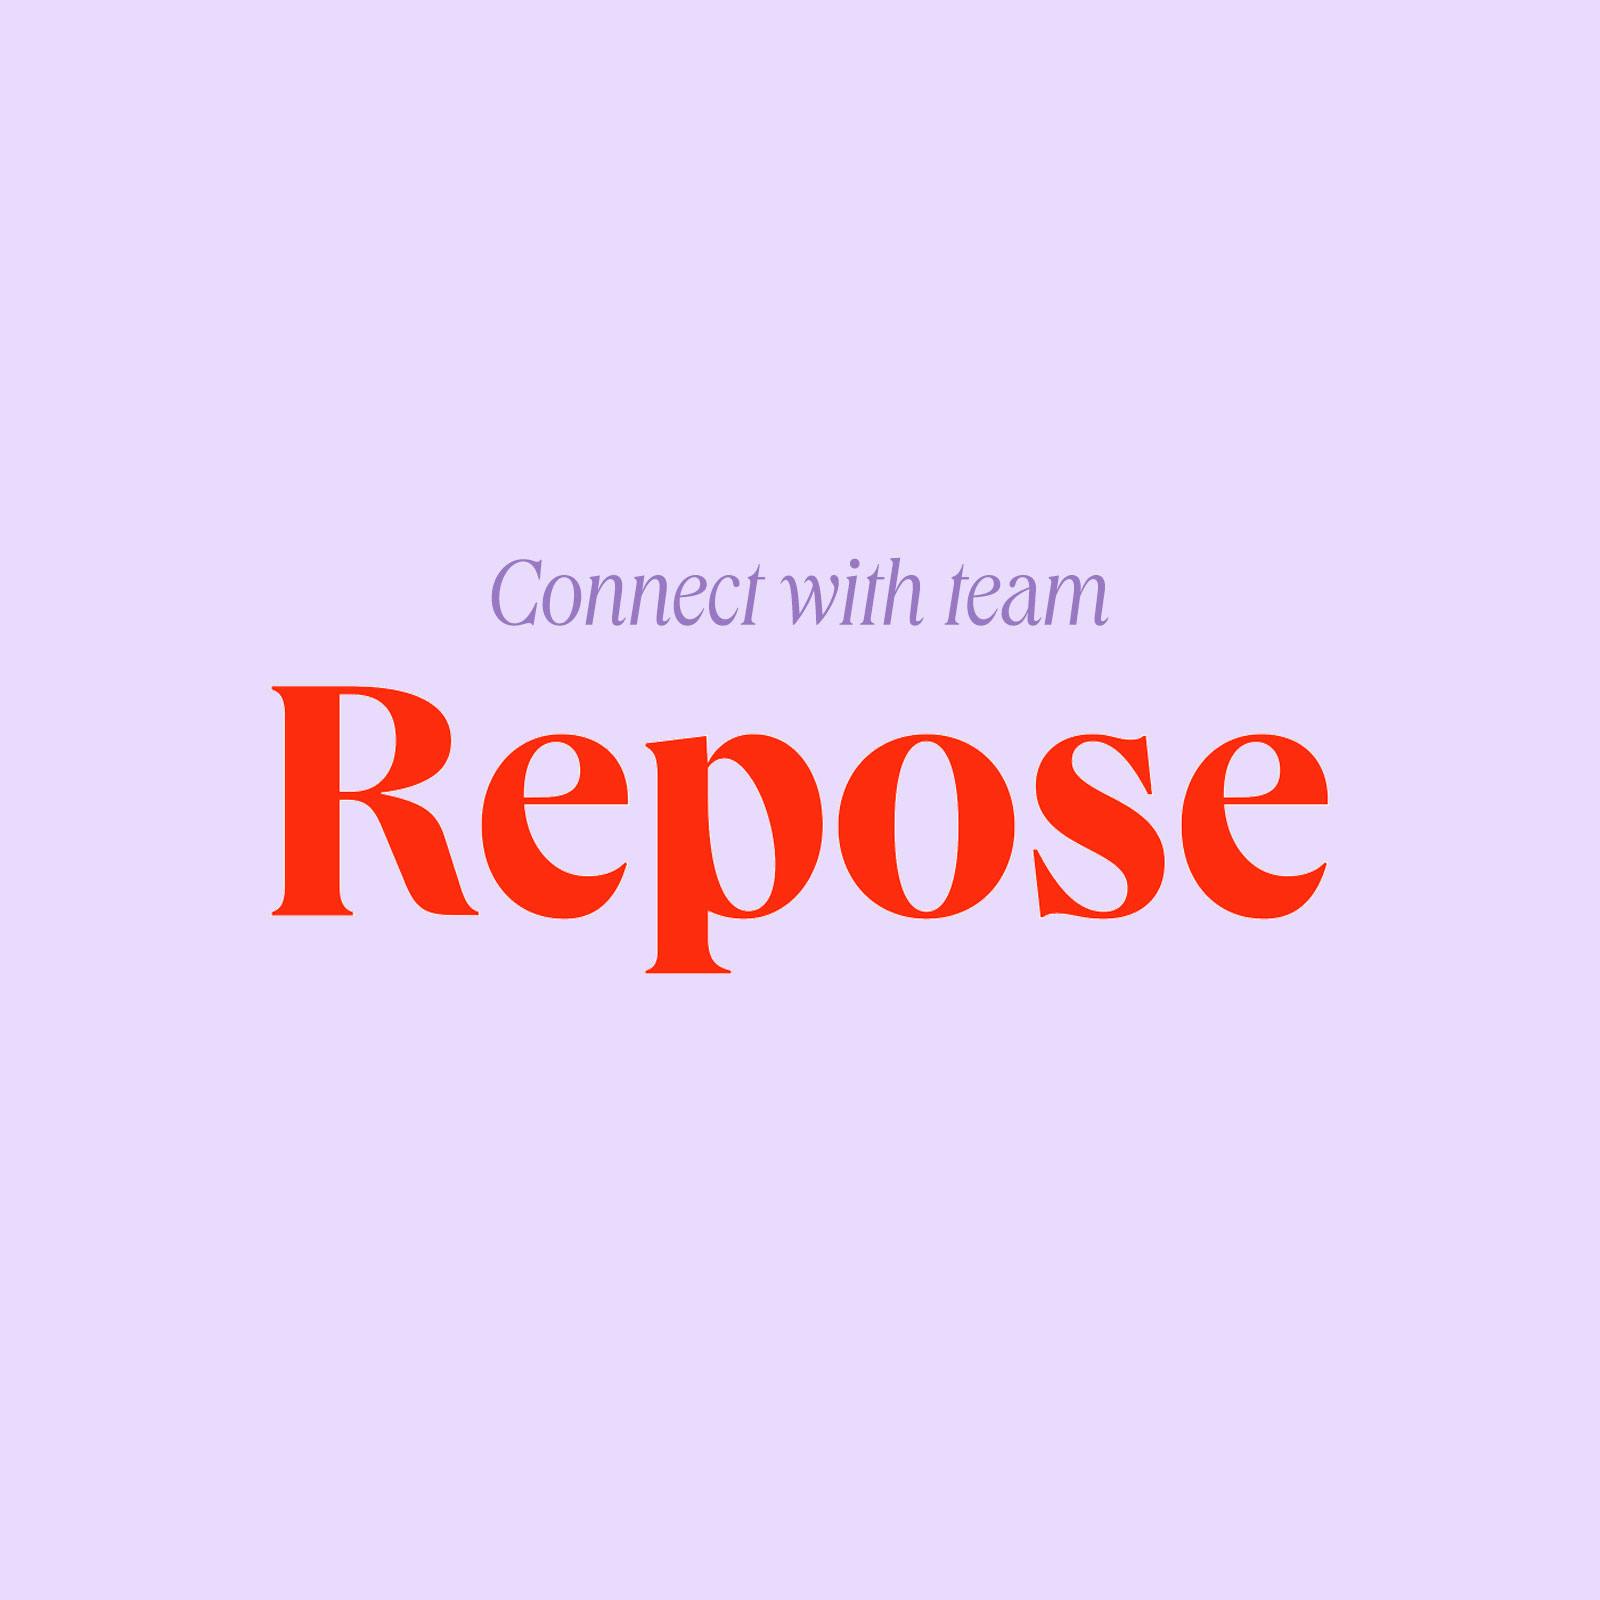 Connect with Repose